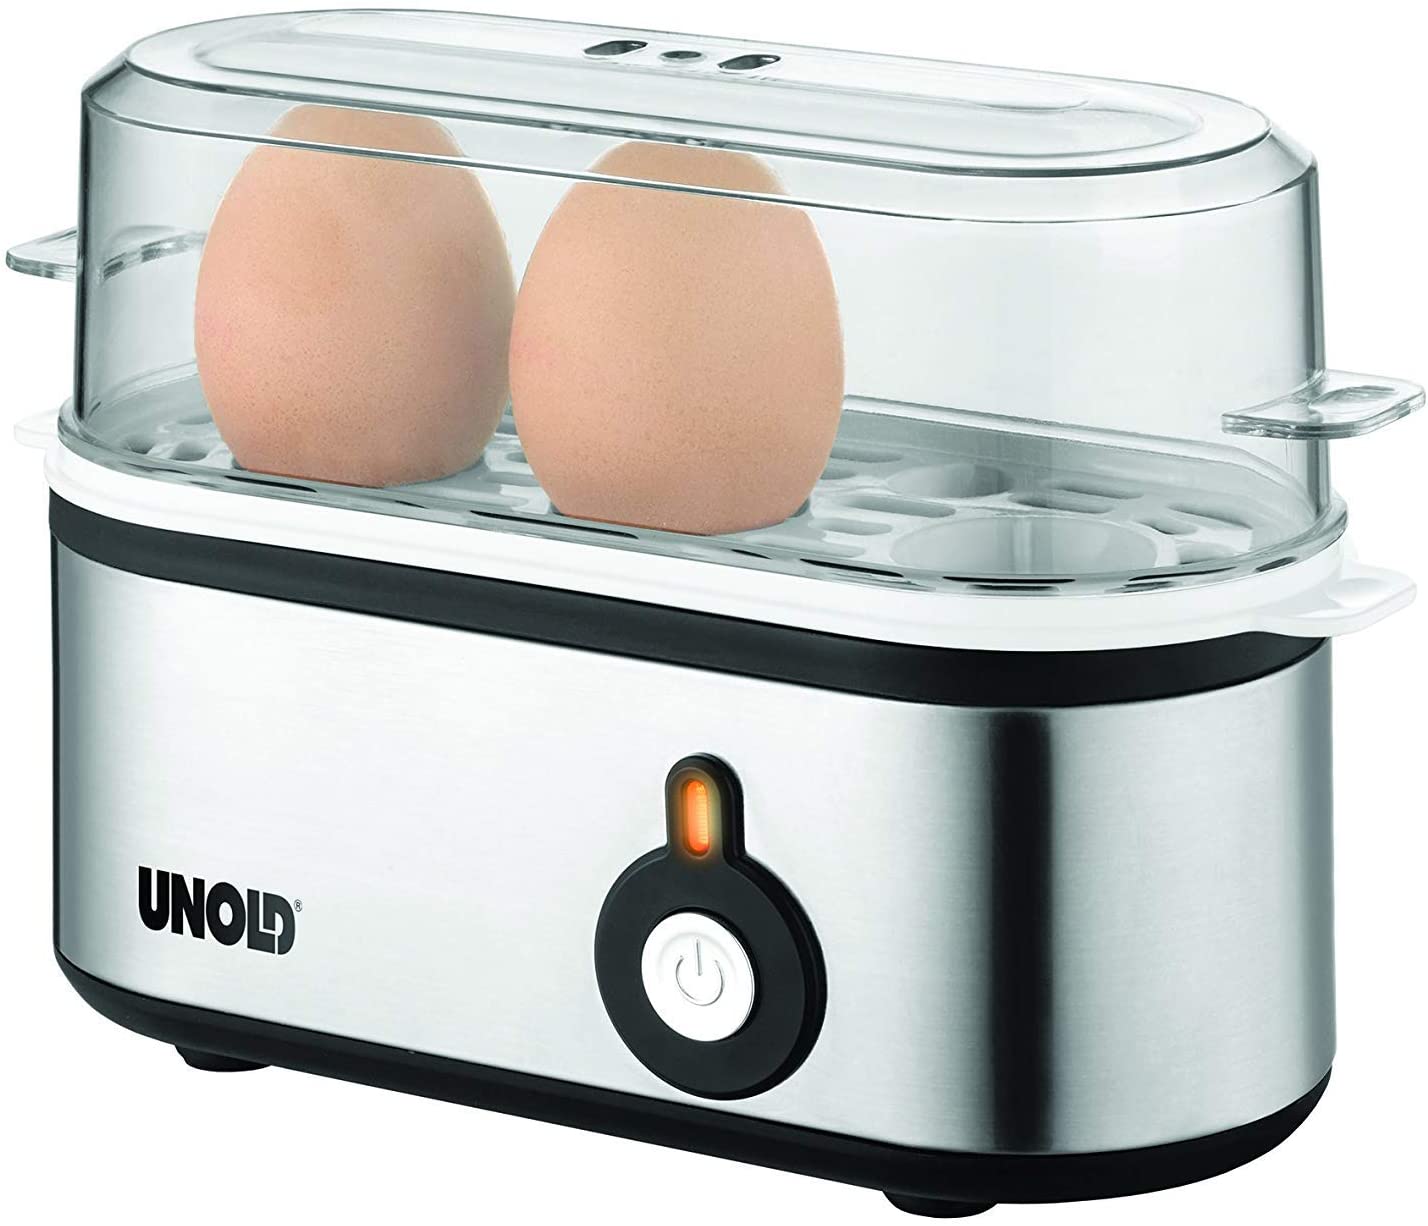 UNOLD 38610 Mini Egg Cooker Stainless Steel Housing Egg Insert with Handle for 1 to 3 Eggs, Beep Sound, Operating Indicator Light and 210 W, Includes Measuring Cup